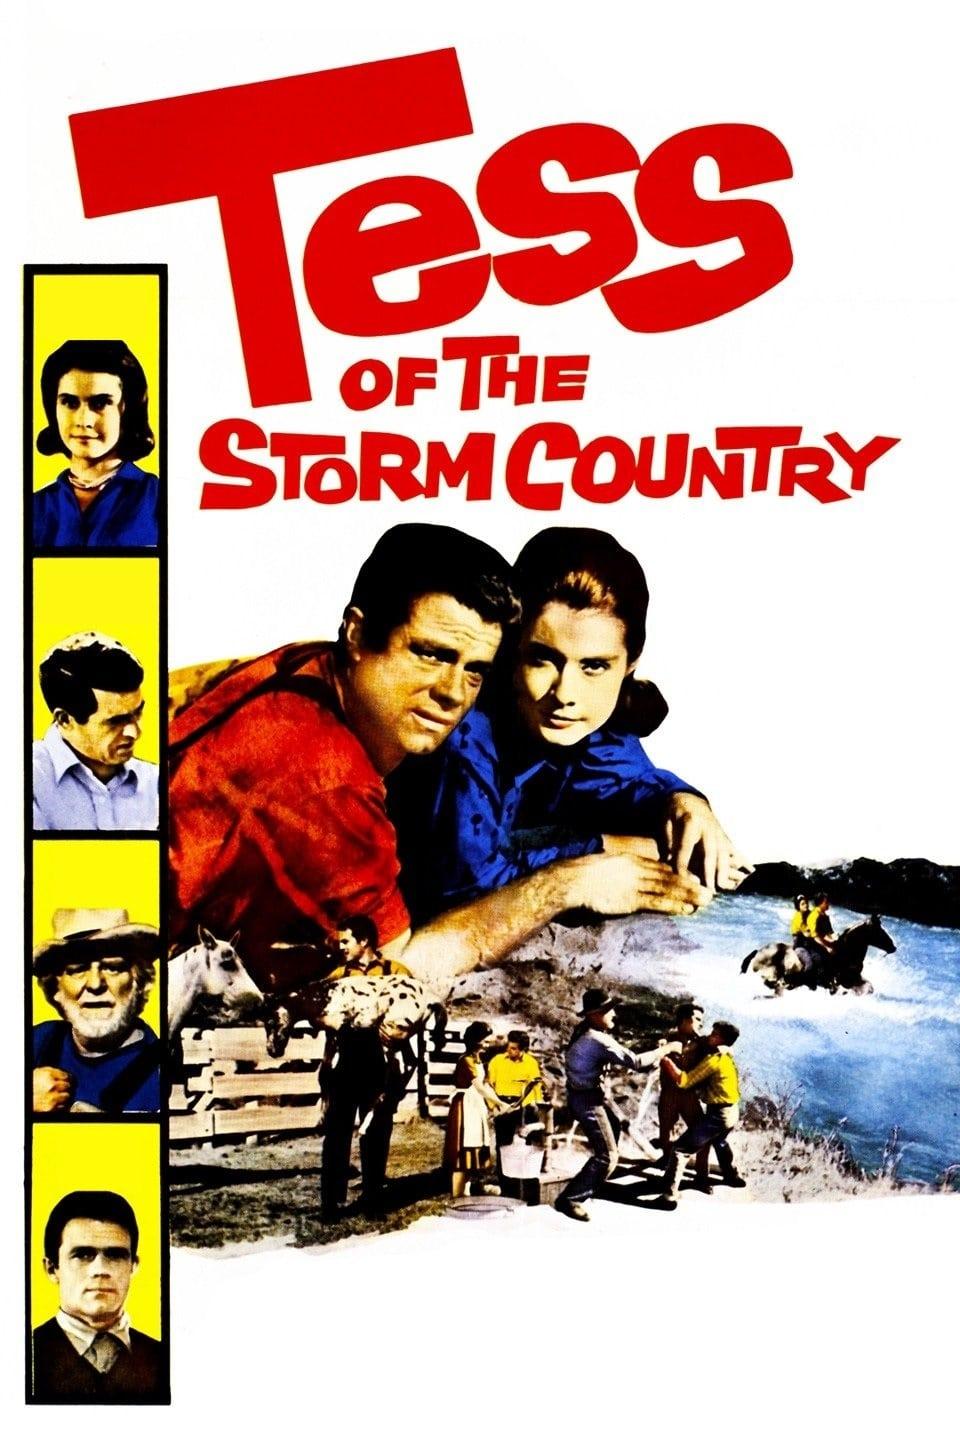 Tess of the Storm Country poster